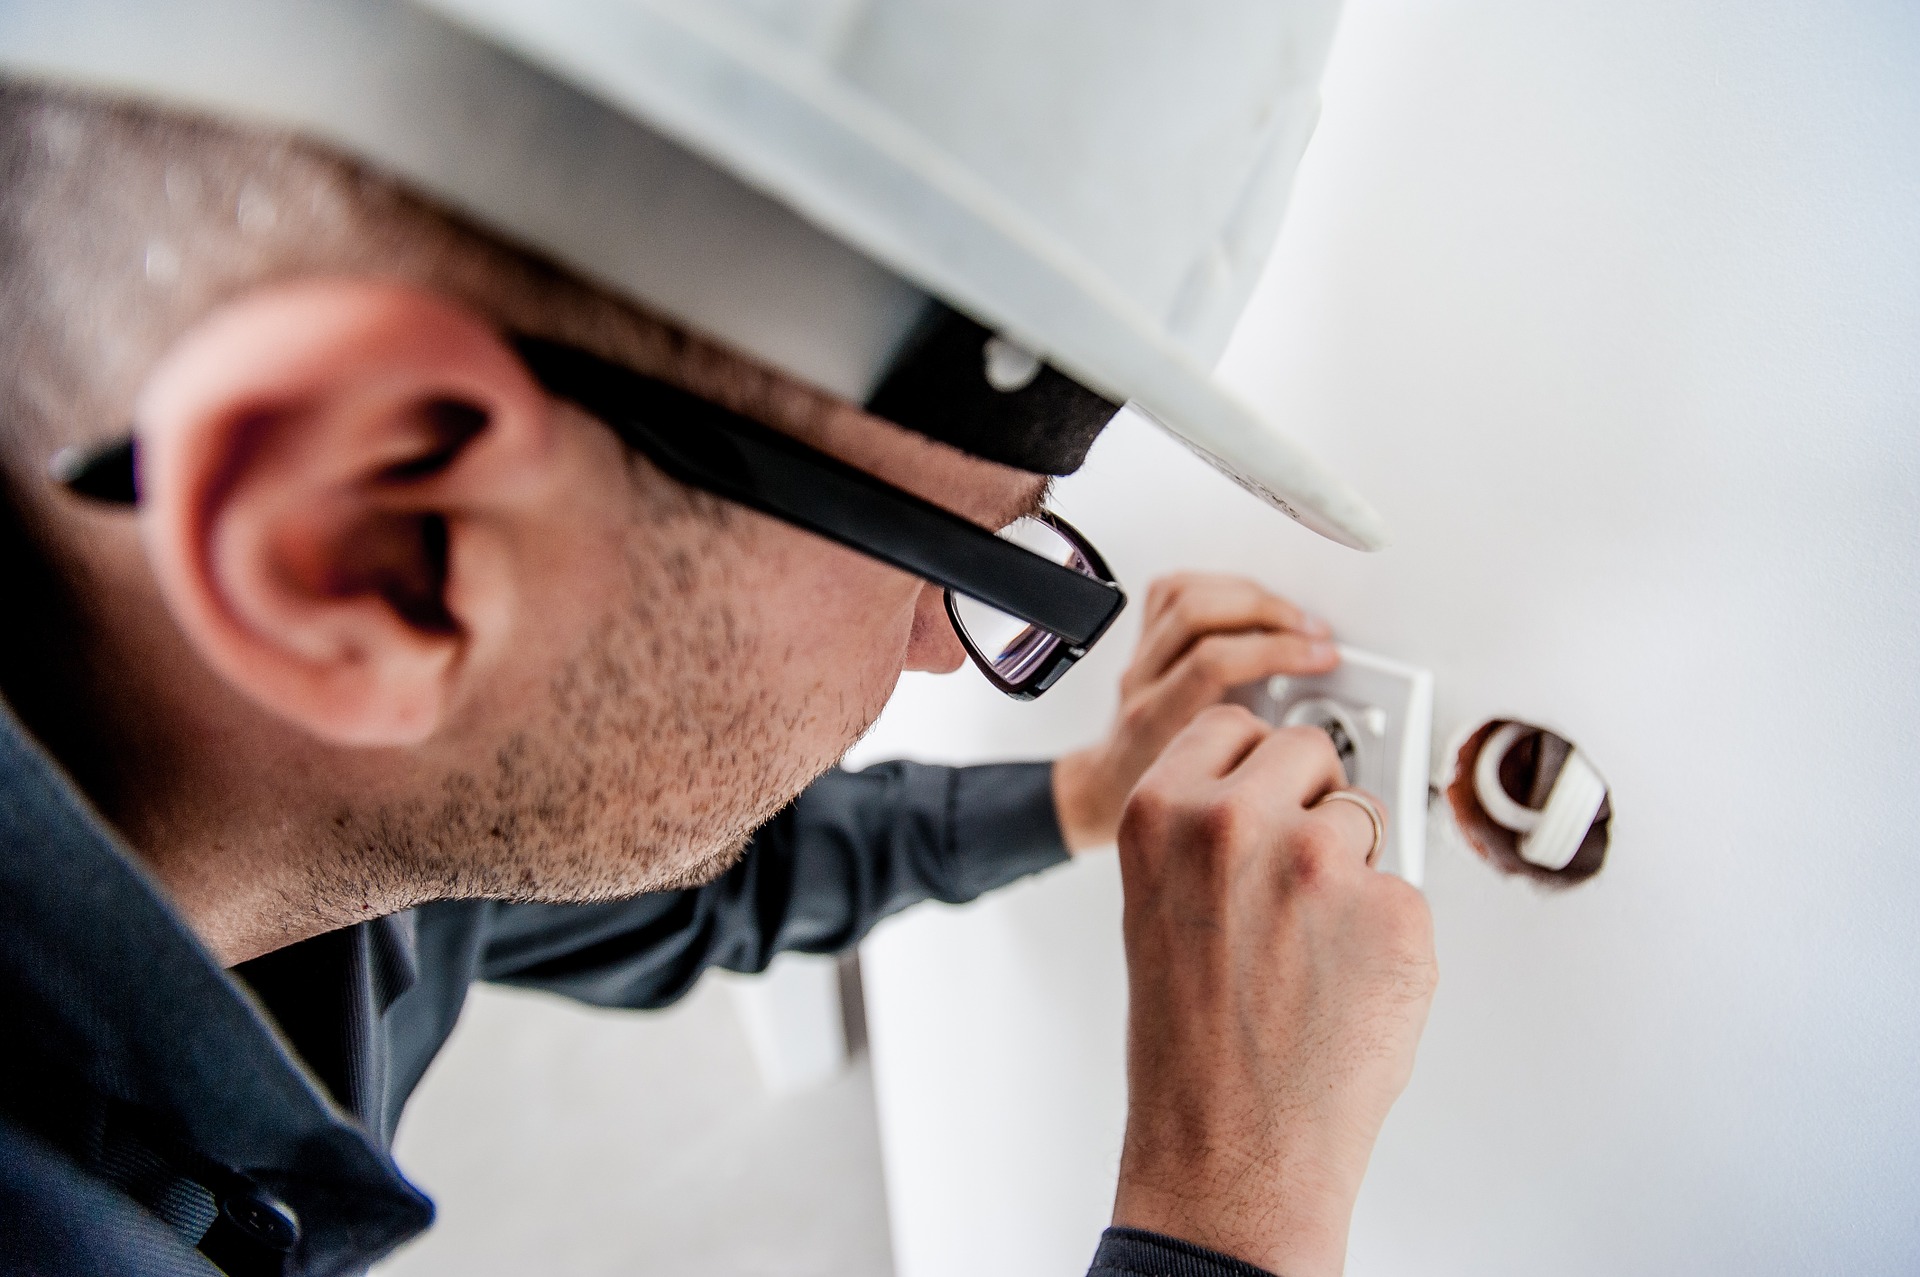 What To Look For In An Electrician